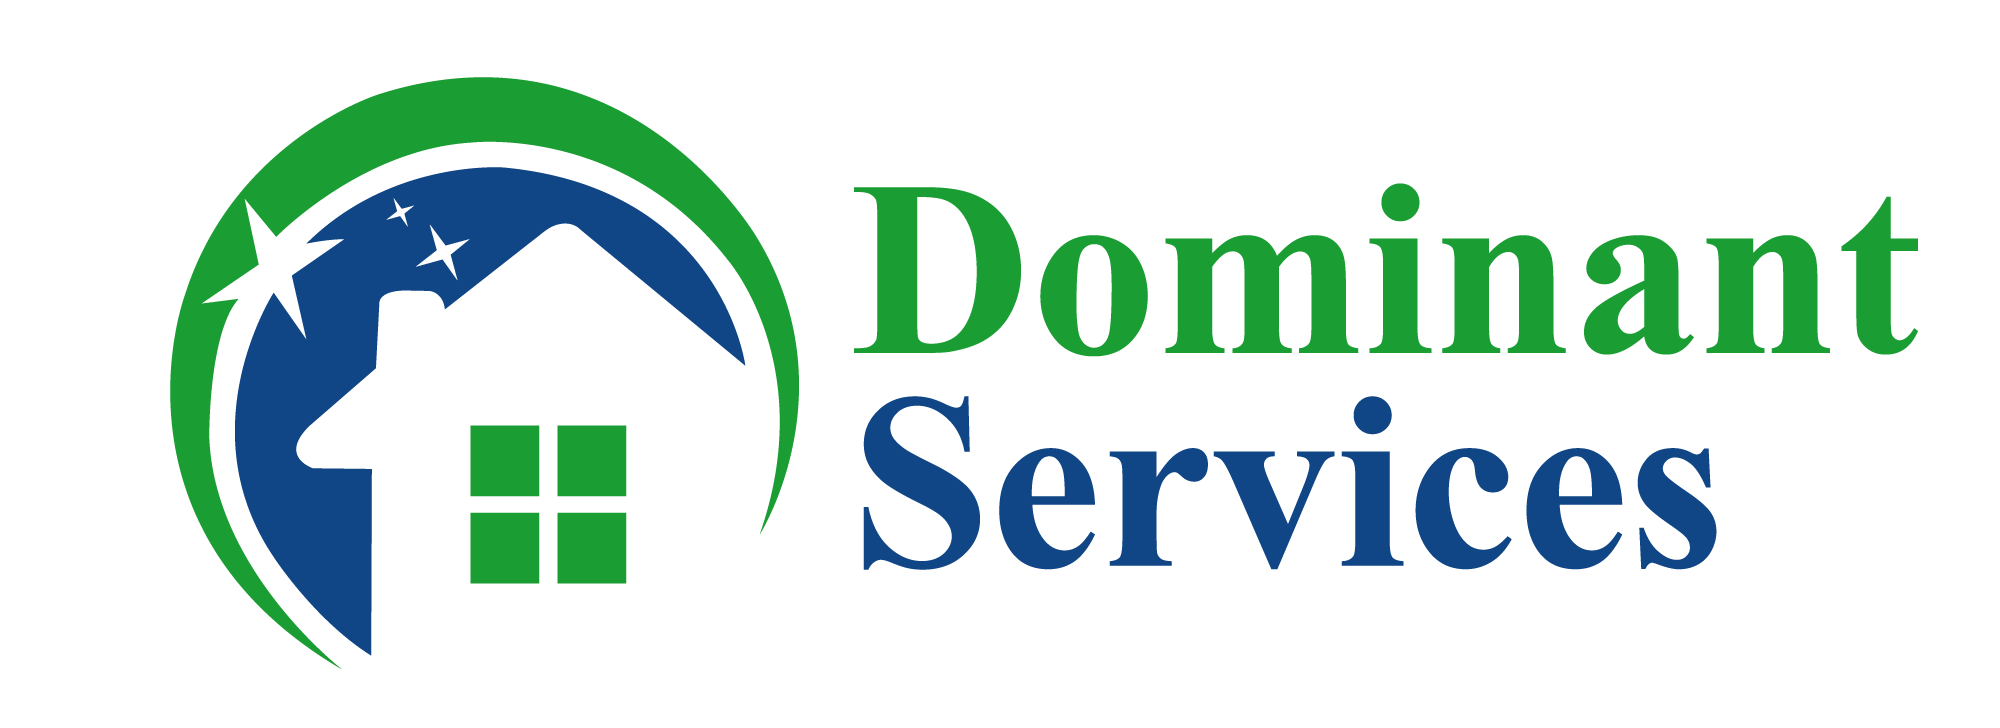 dominant services